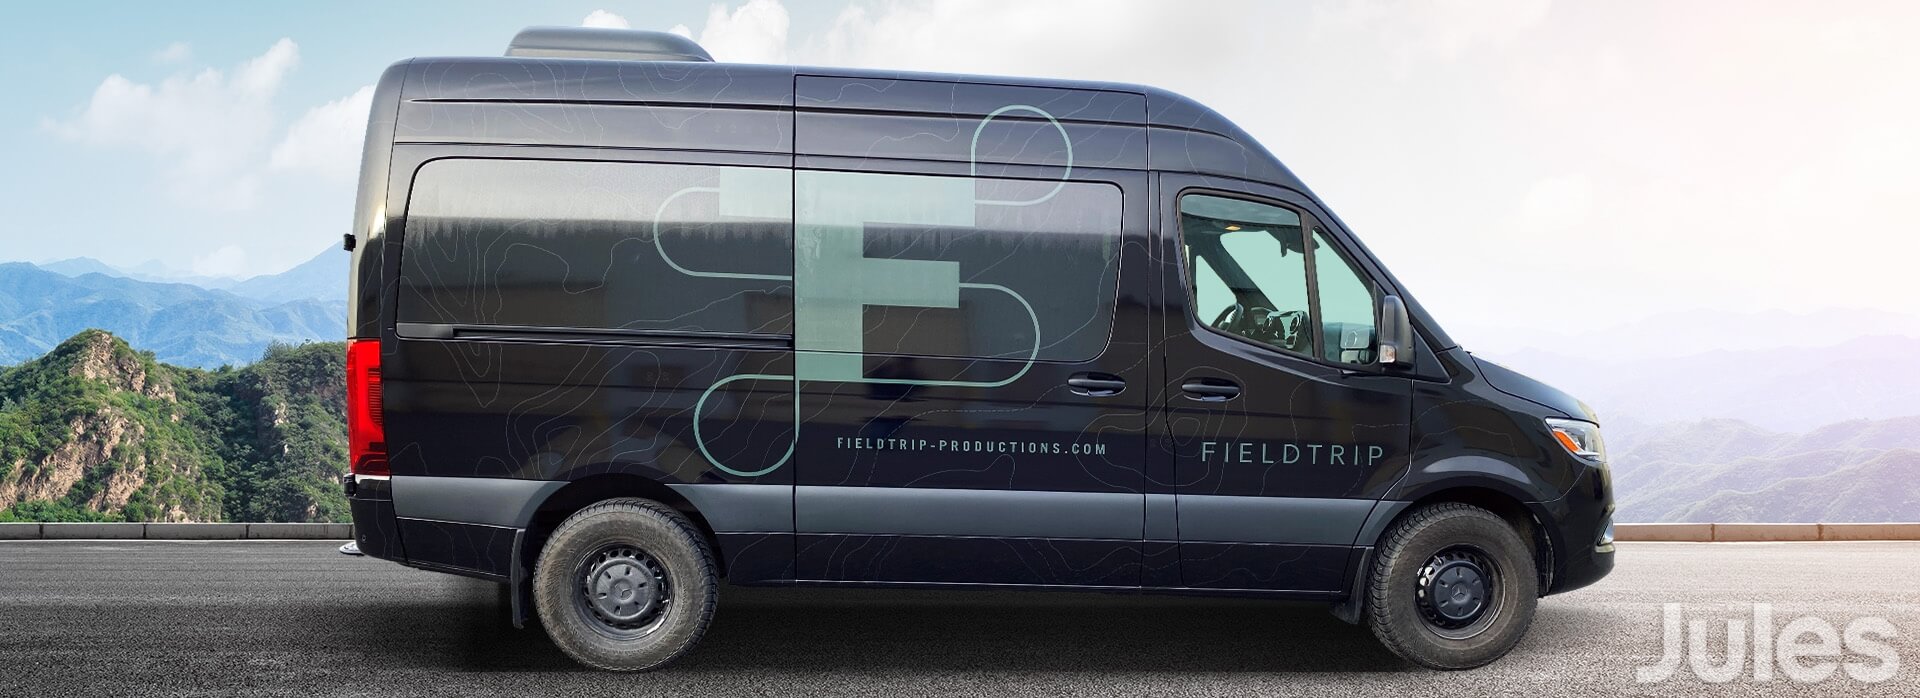 LETTRAGE SPRINTER FIELDTRIP-PRODUCTIONS.COM FULL WRAP COMPLET